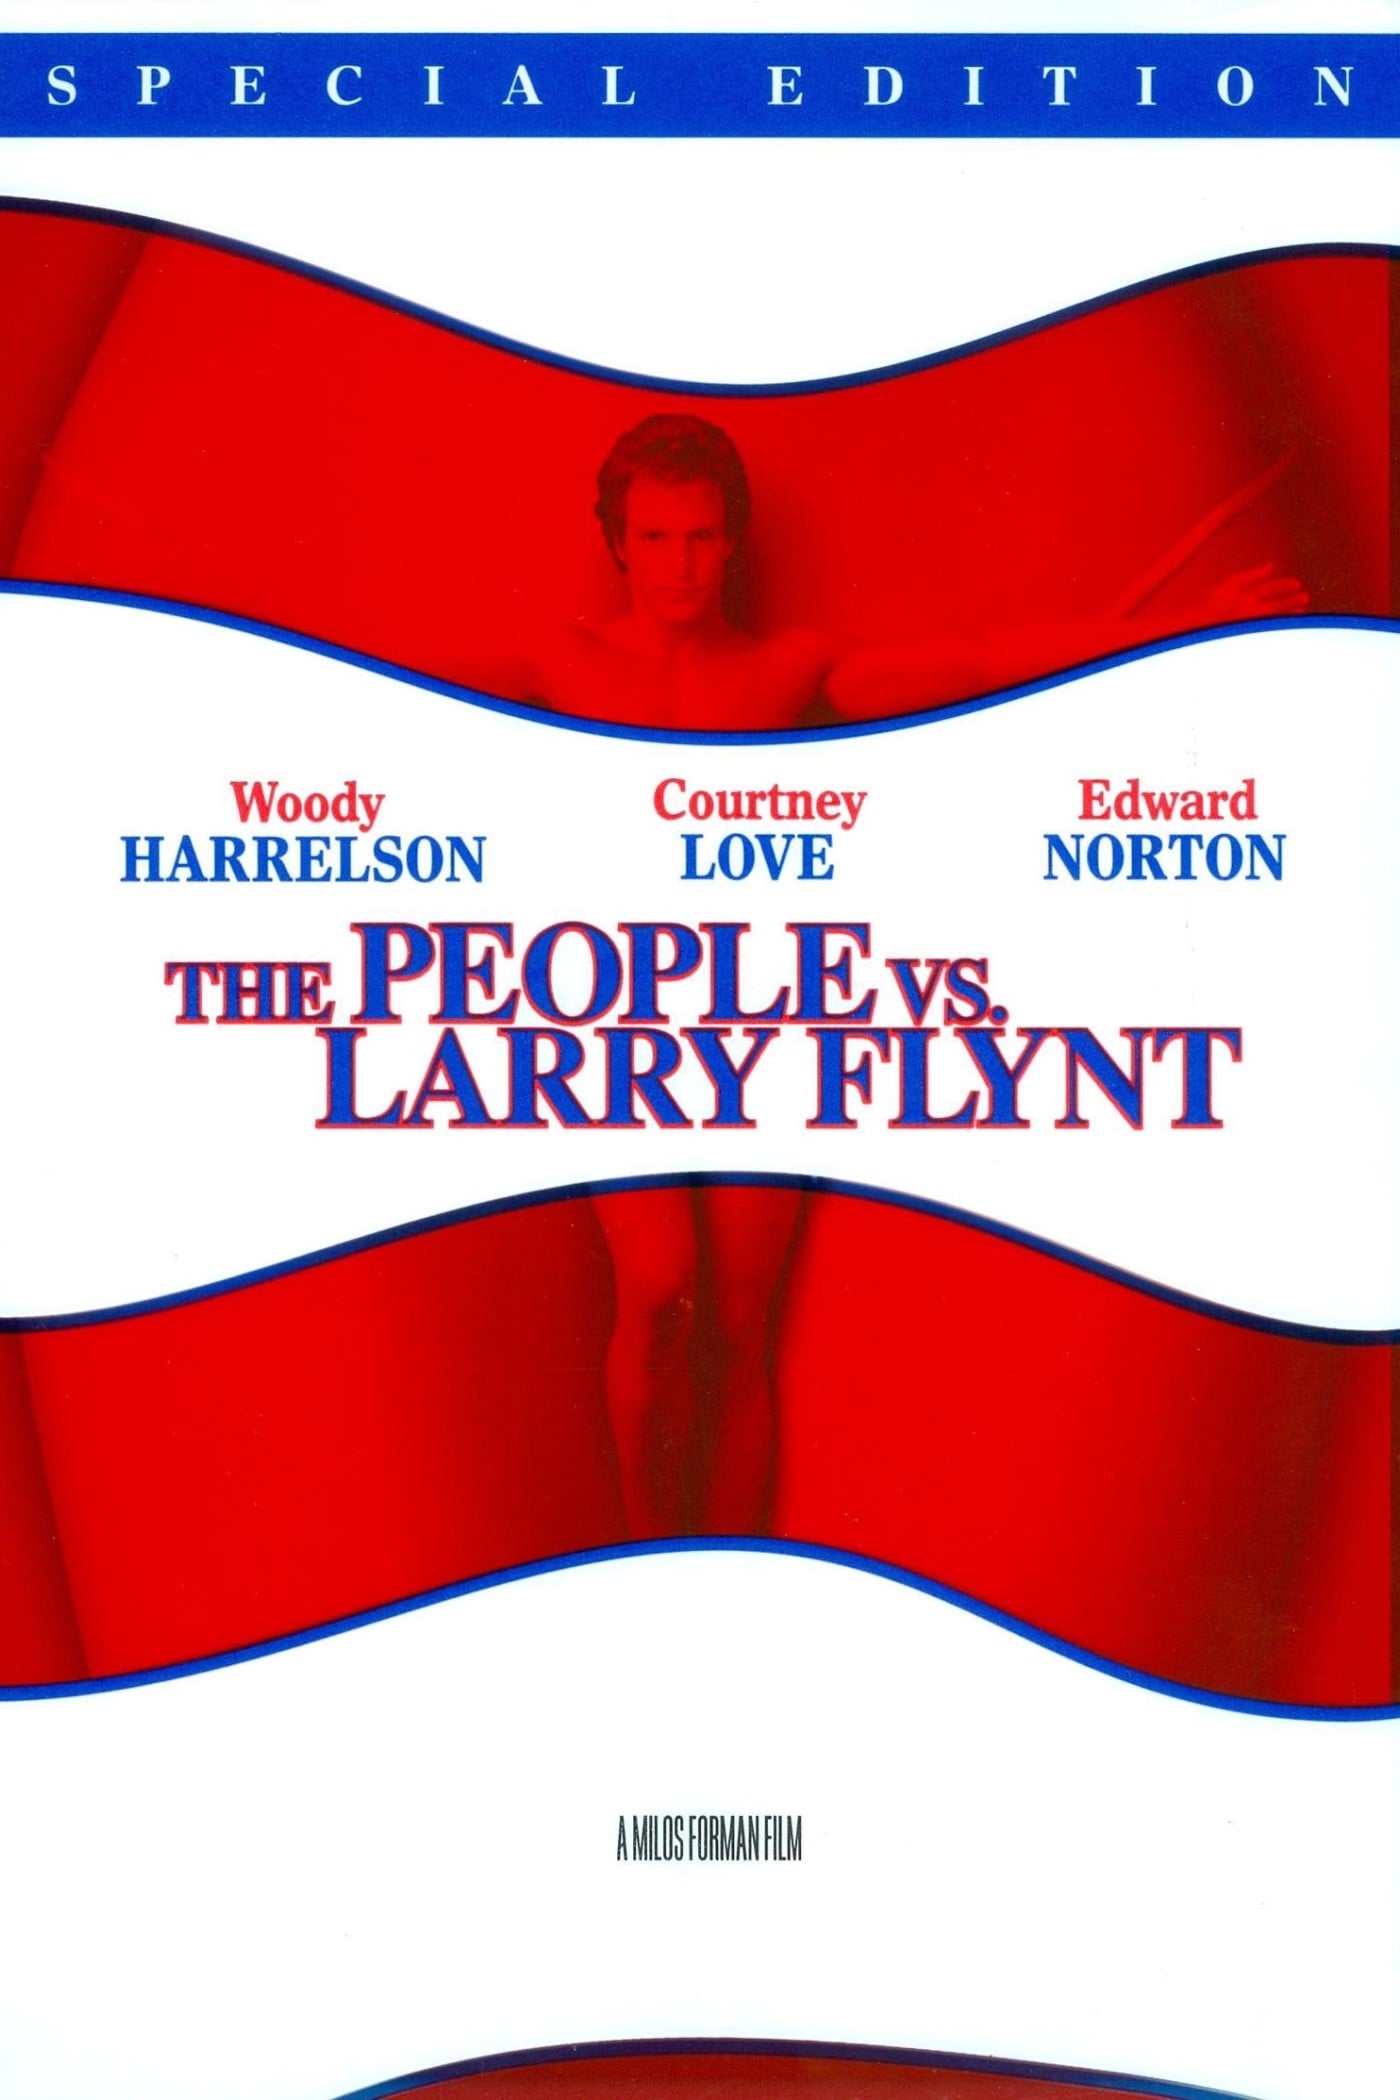 The People vs. Larry Flynt Movie poster